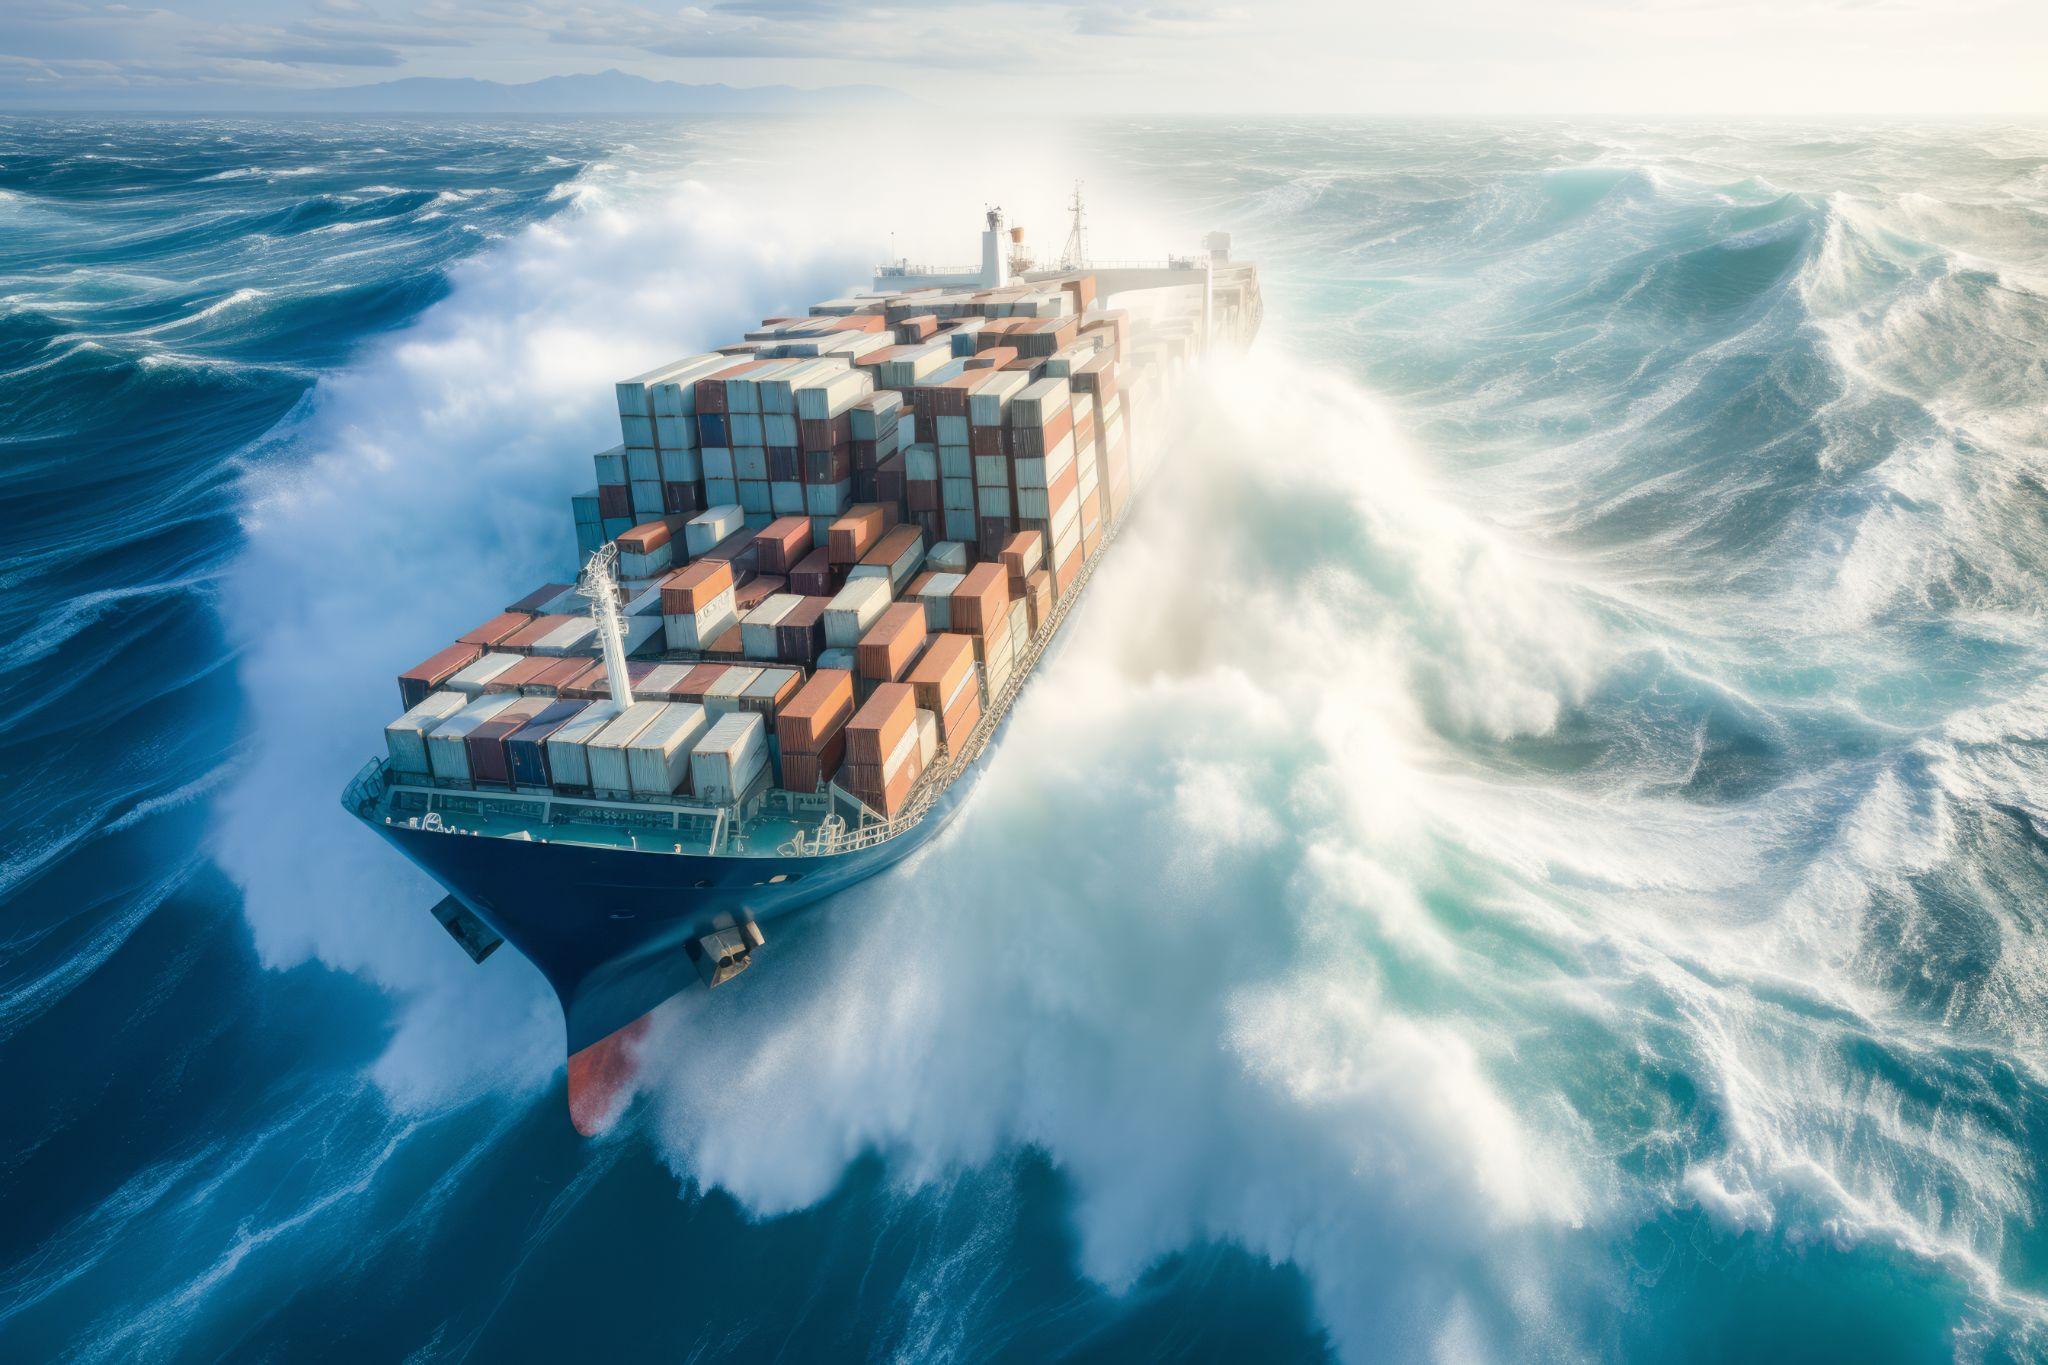 Amidst a raging storm, a resilient shipping vessel sails bravely through the vast expanse of the ocean